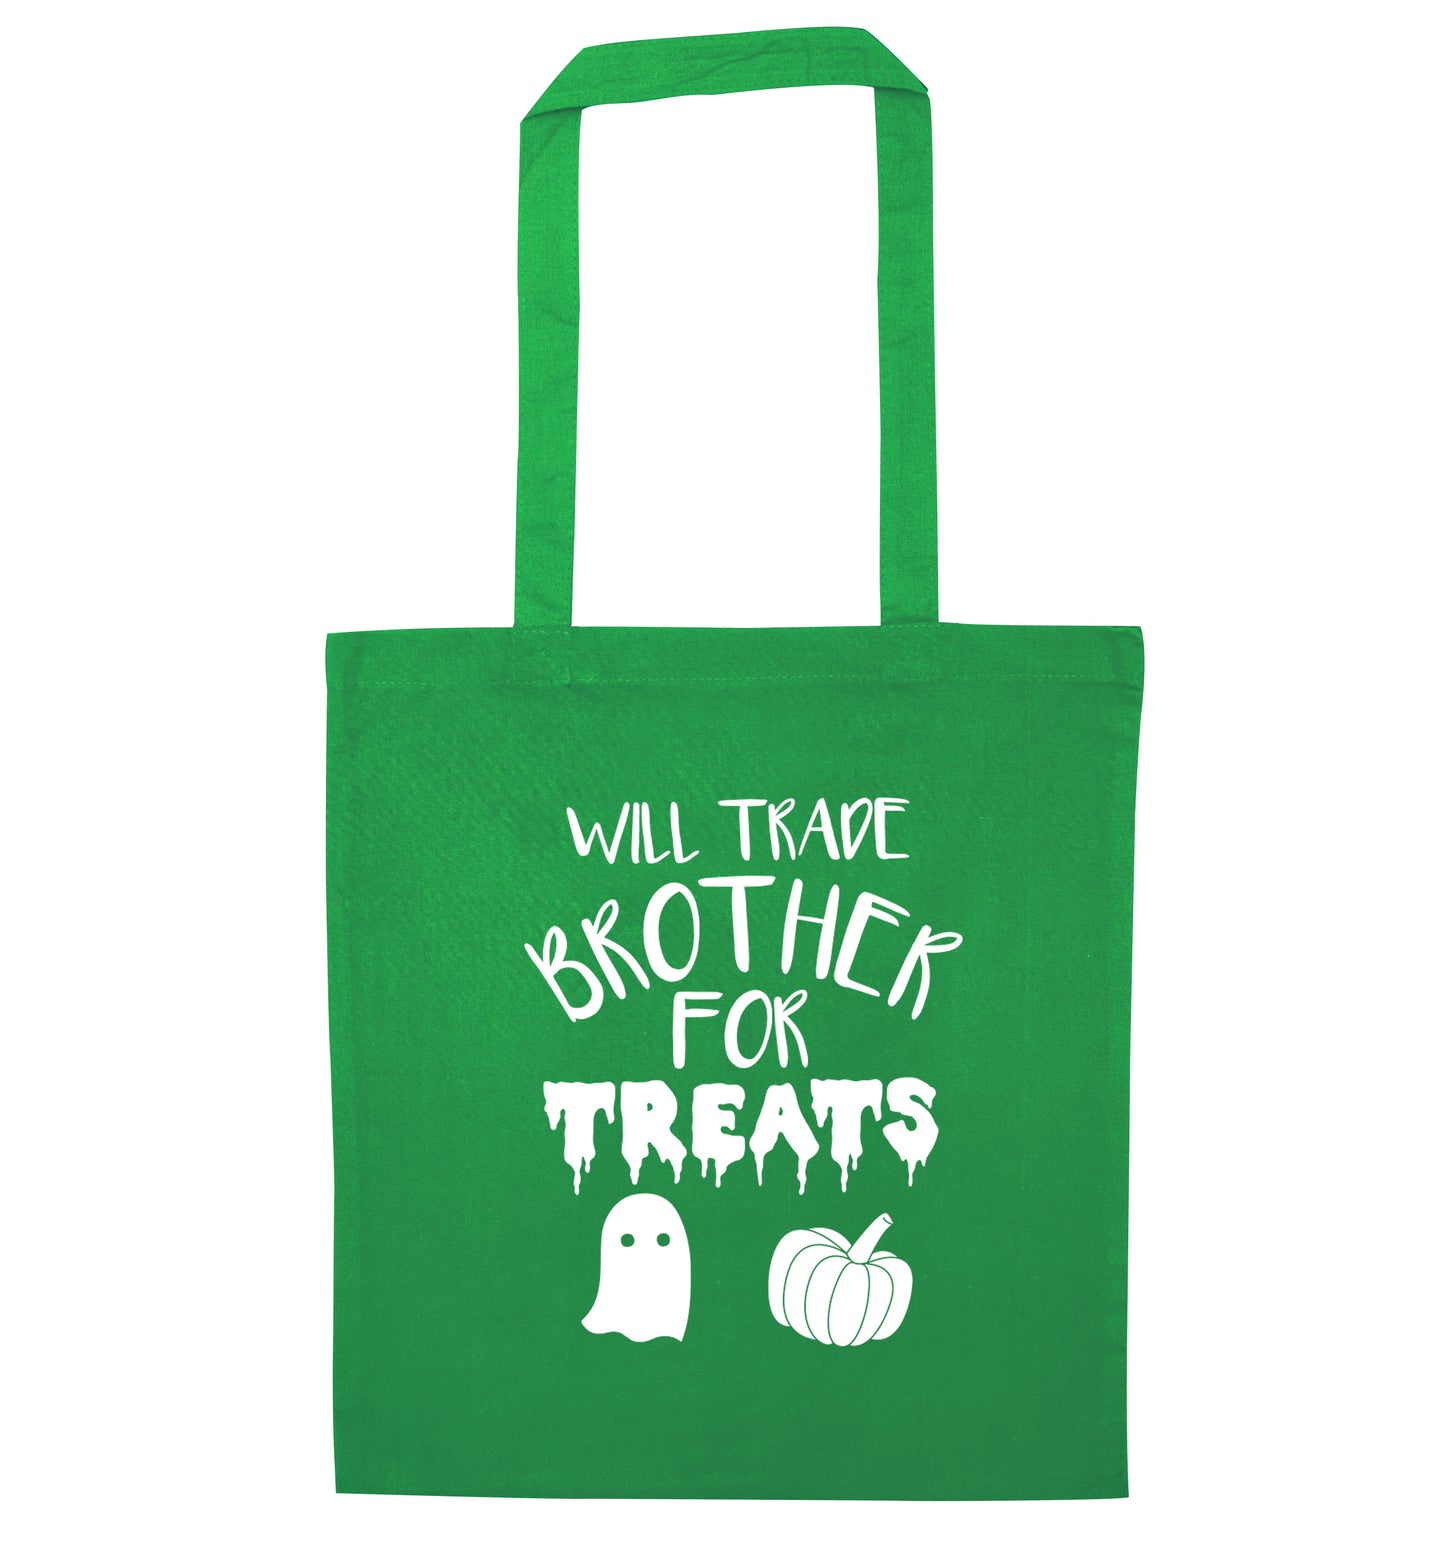 Will trade brother for sweets green tote bag